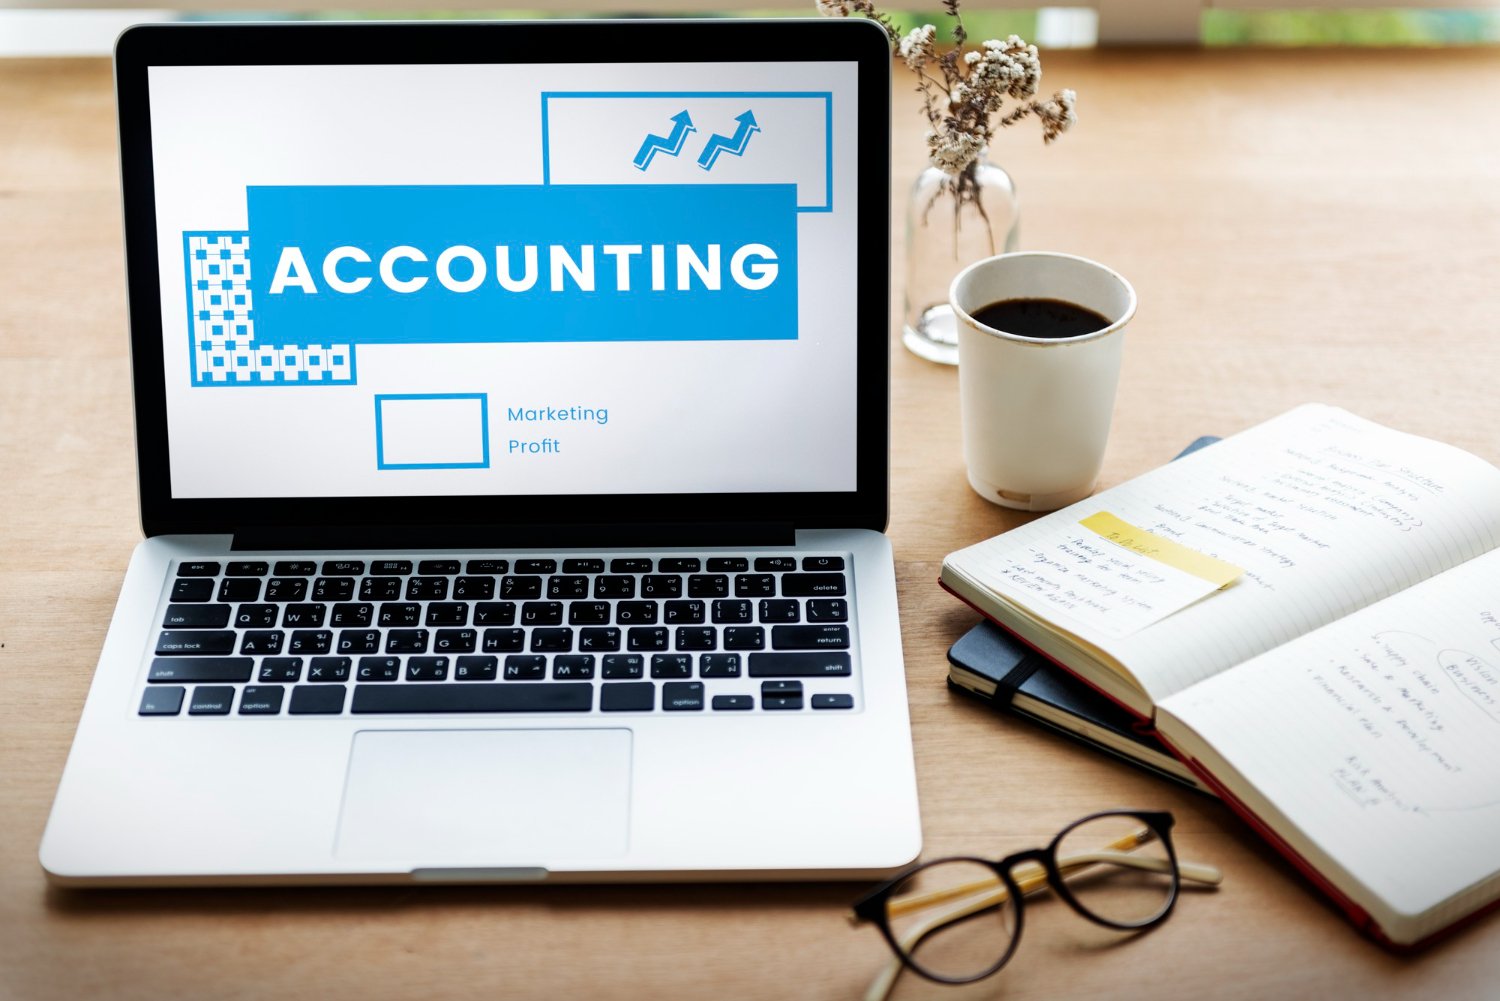 A career in accounting